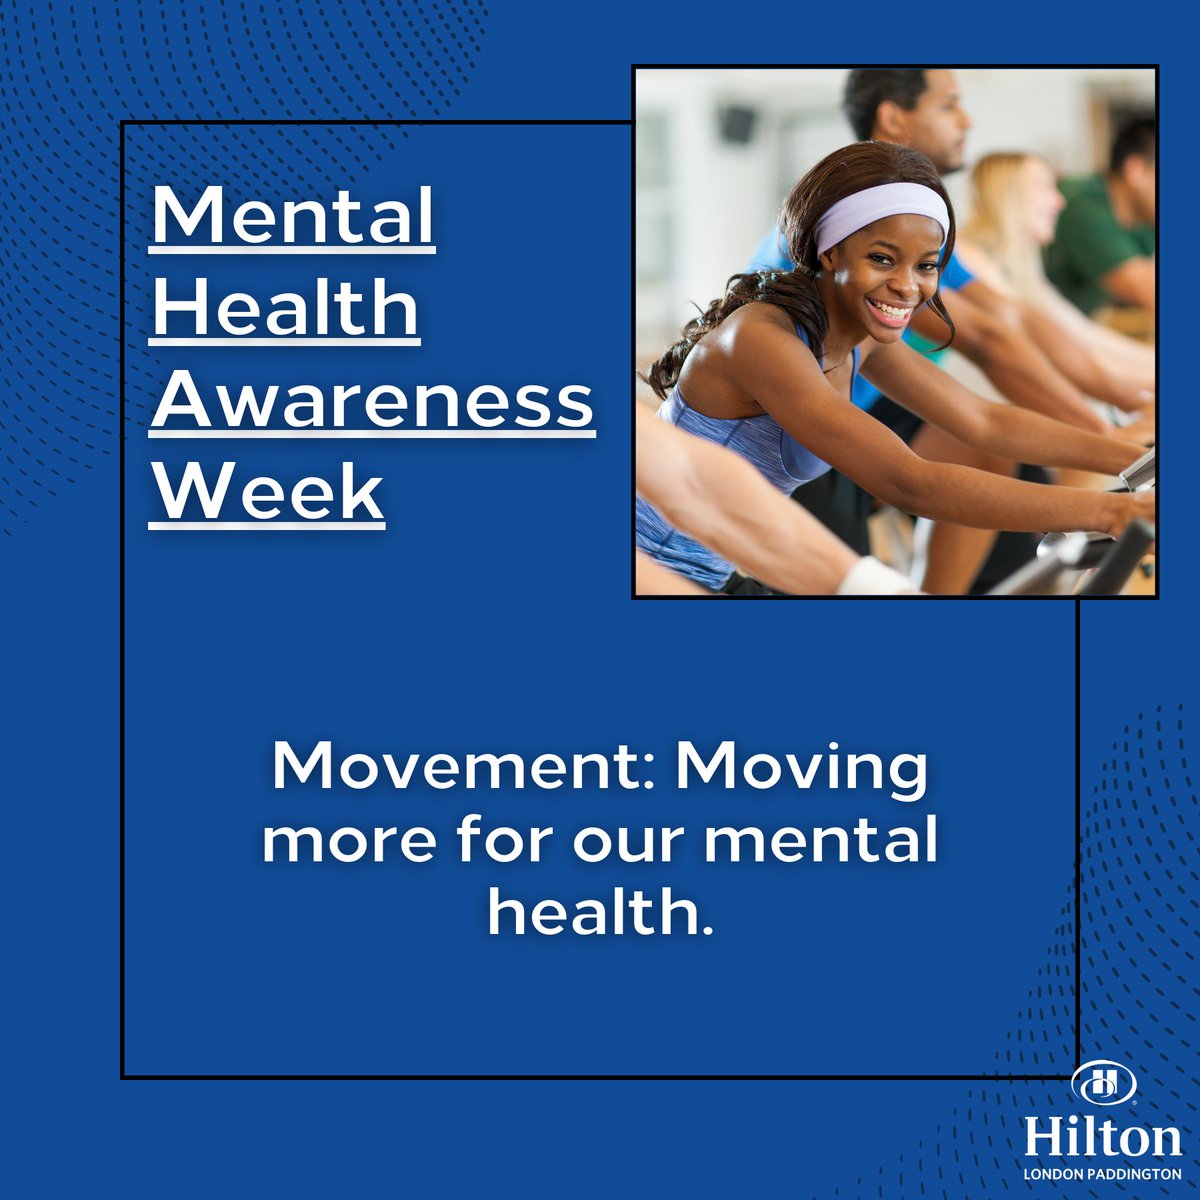 People are the greatest asset of any organisation and their well being is a key priority for Hilton as demonstrated by its Care For All Platform #mentalhealthawarenessweek #momentsformovement #nomindleftbehind #mentalhealthmatters #careforall #wearehiltonwearehospitality